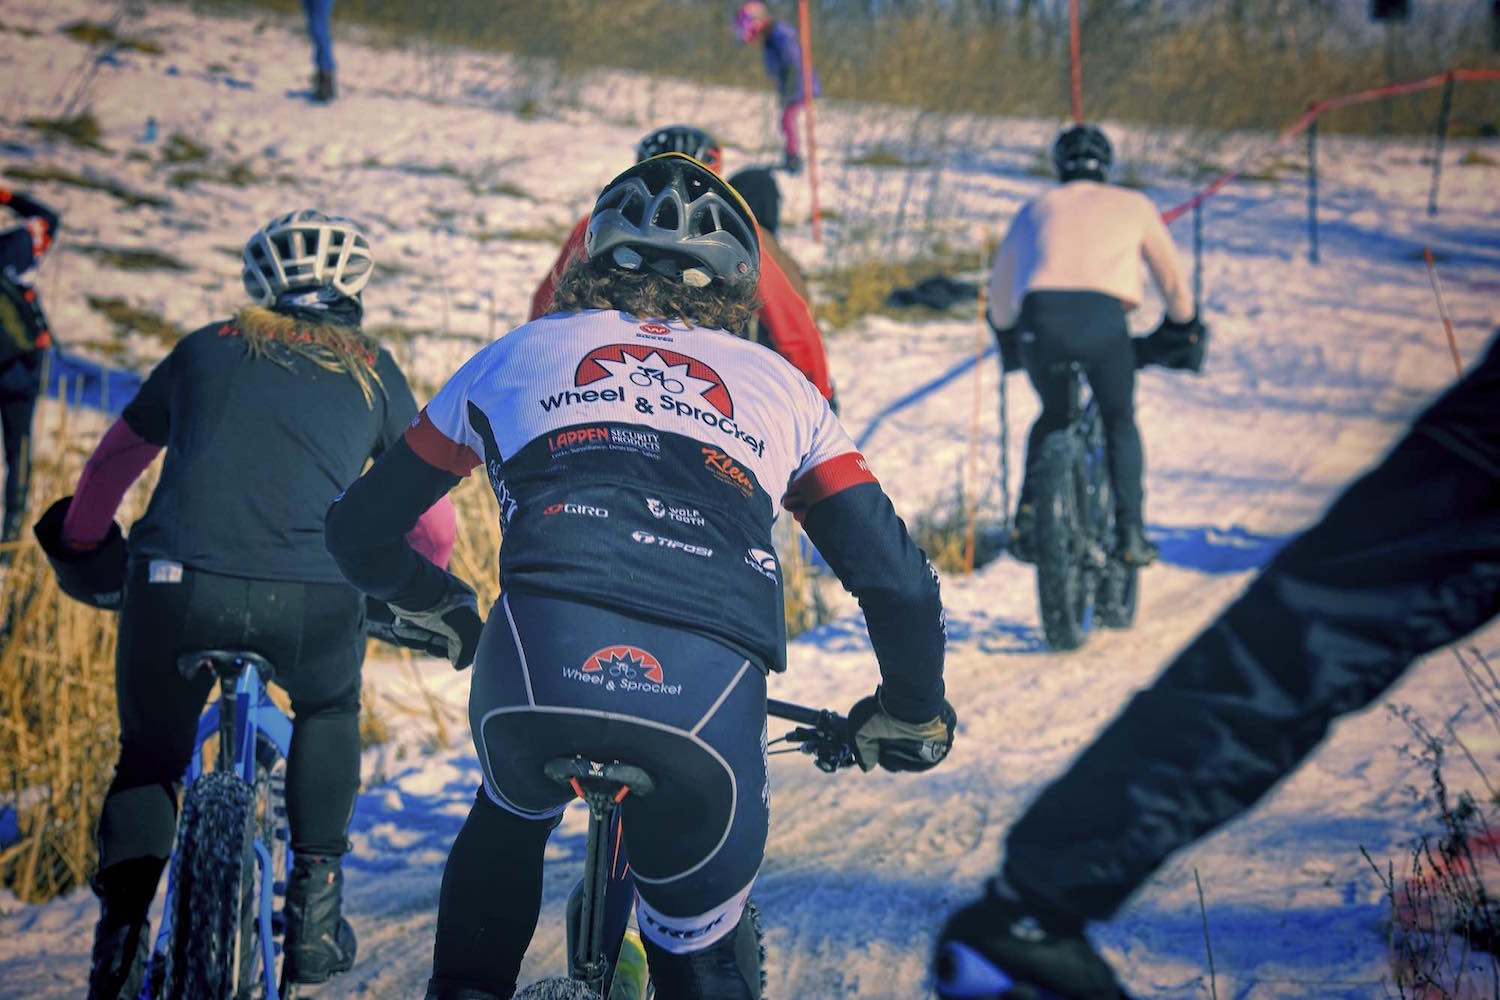 The fat bike peloton thunders down a straightaway at Lecker Park in Appleton, Wisconsin.